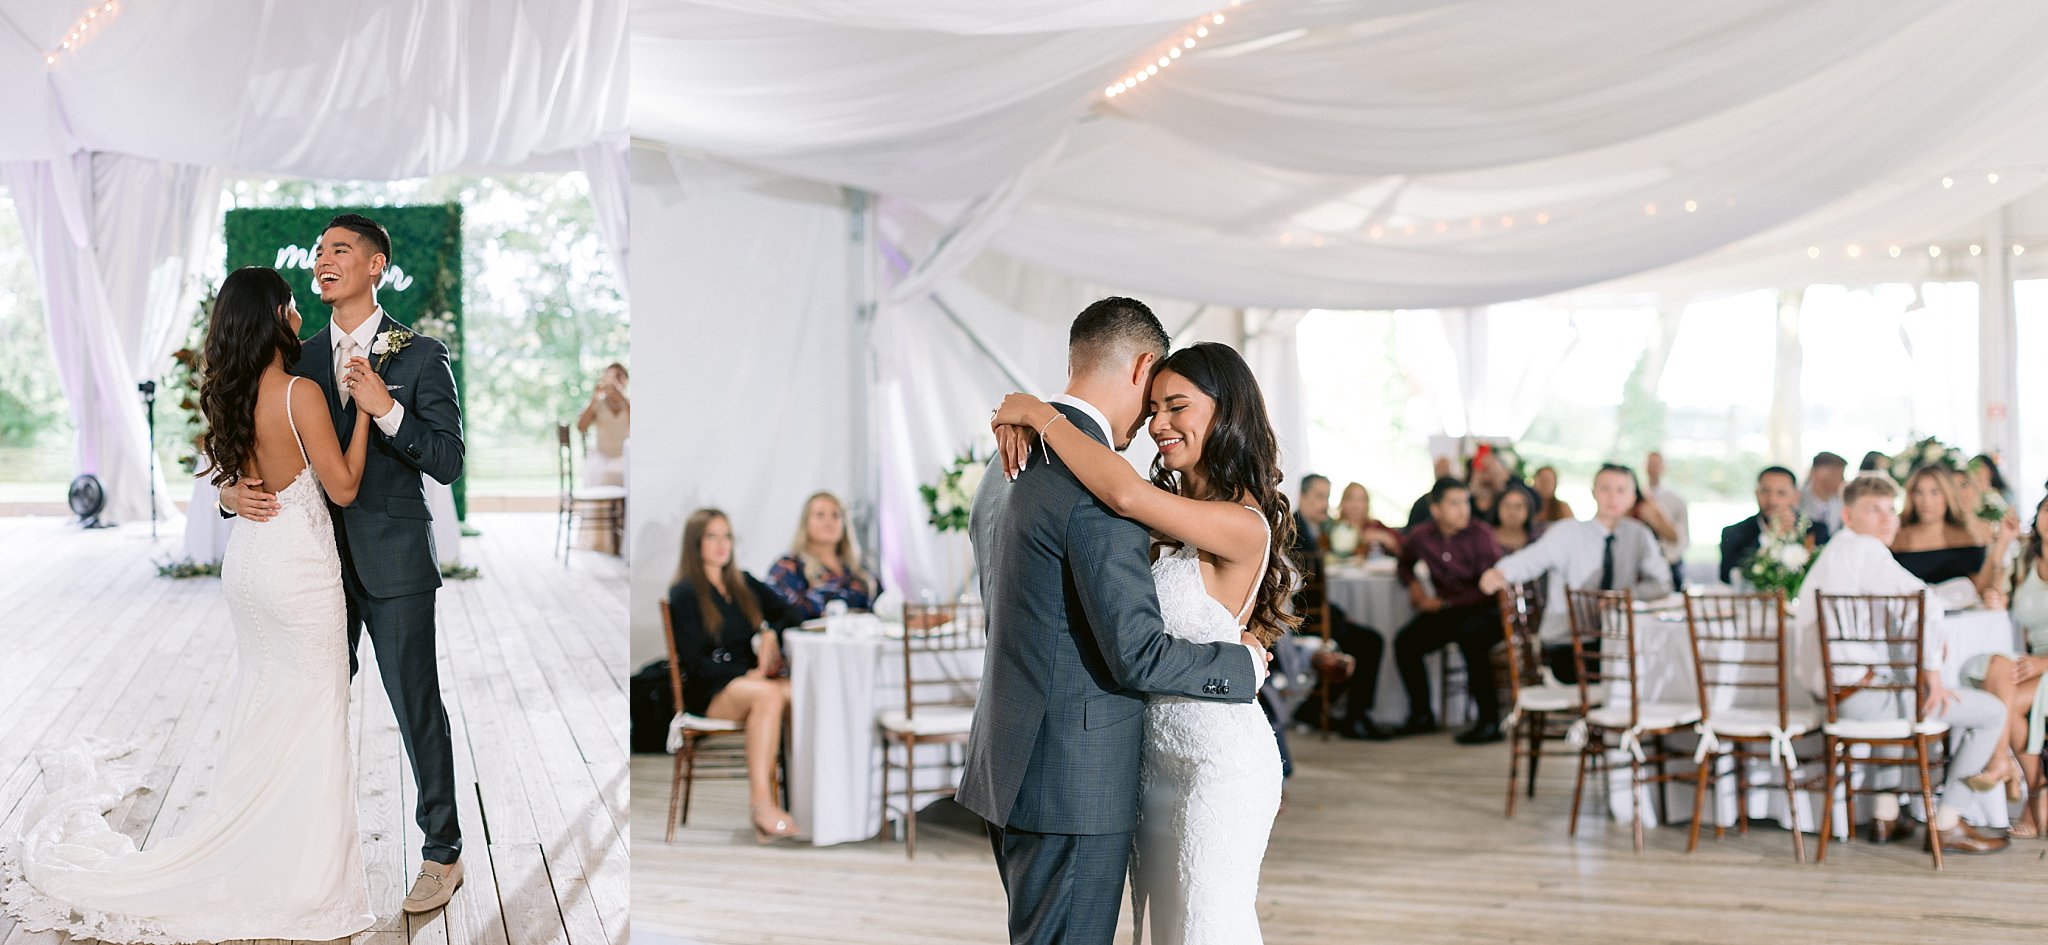 Bride and groom, york college alumni, share a first dance at their tented reception at walker's overlook in MD